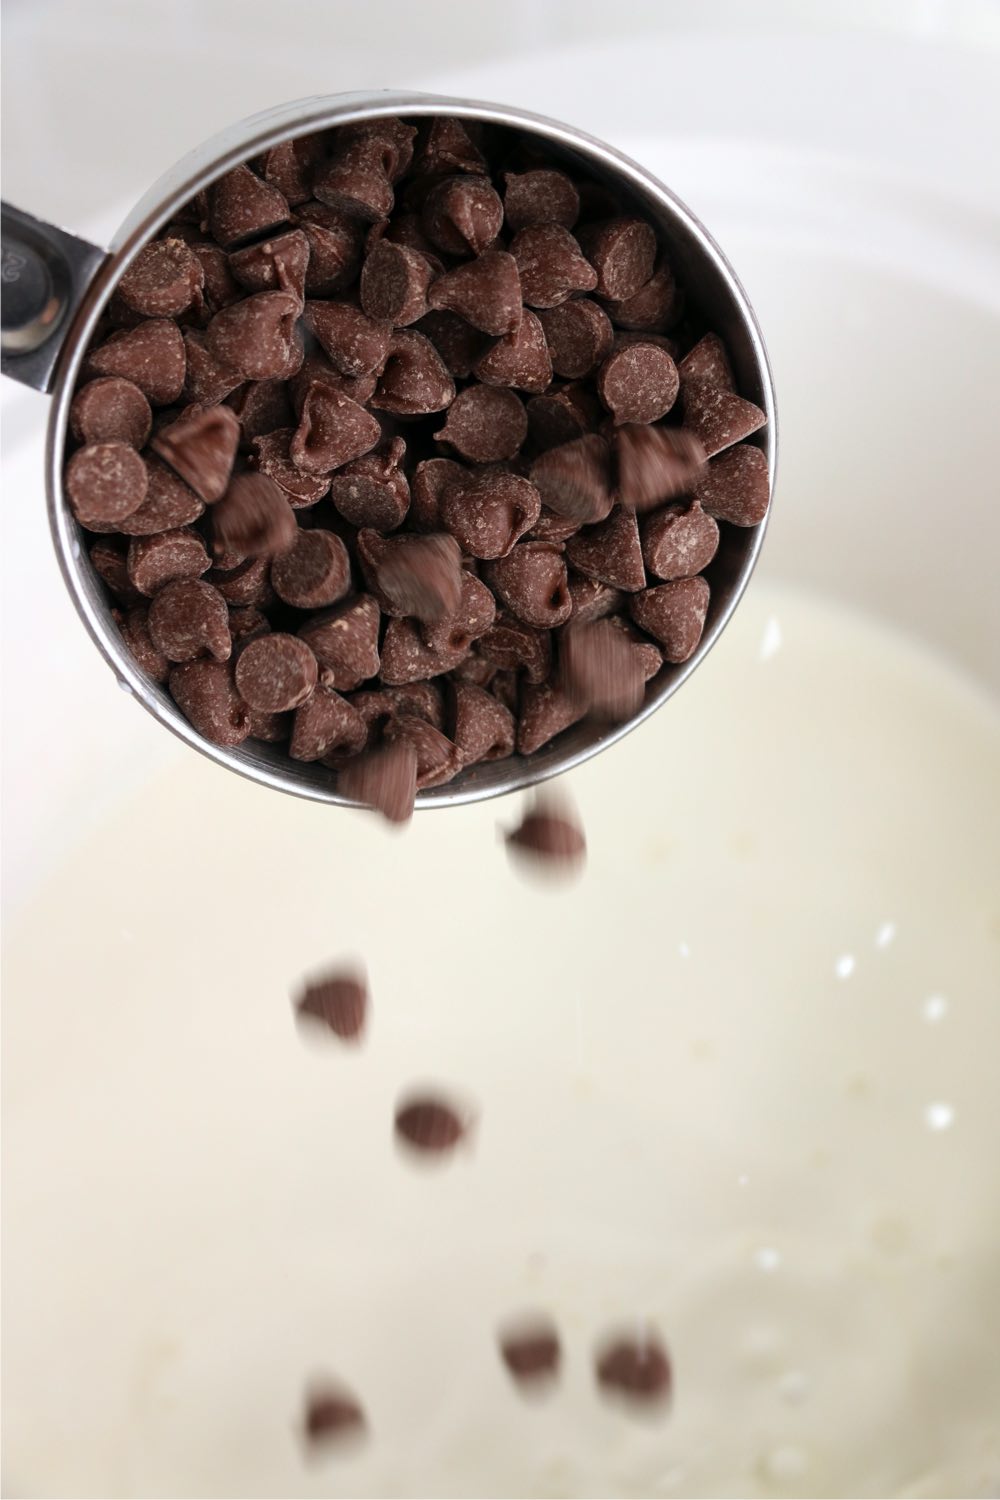 Adding chocolate chips to milk in a slow cooker